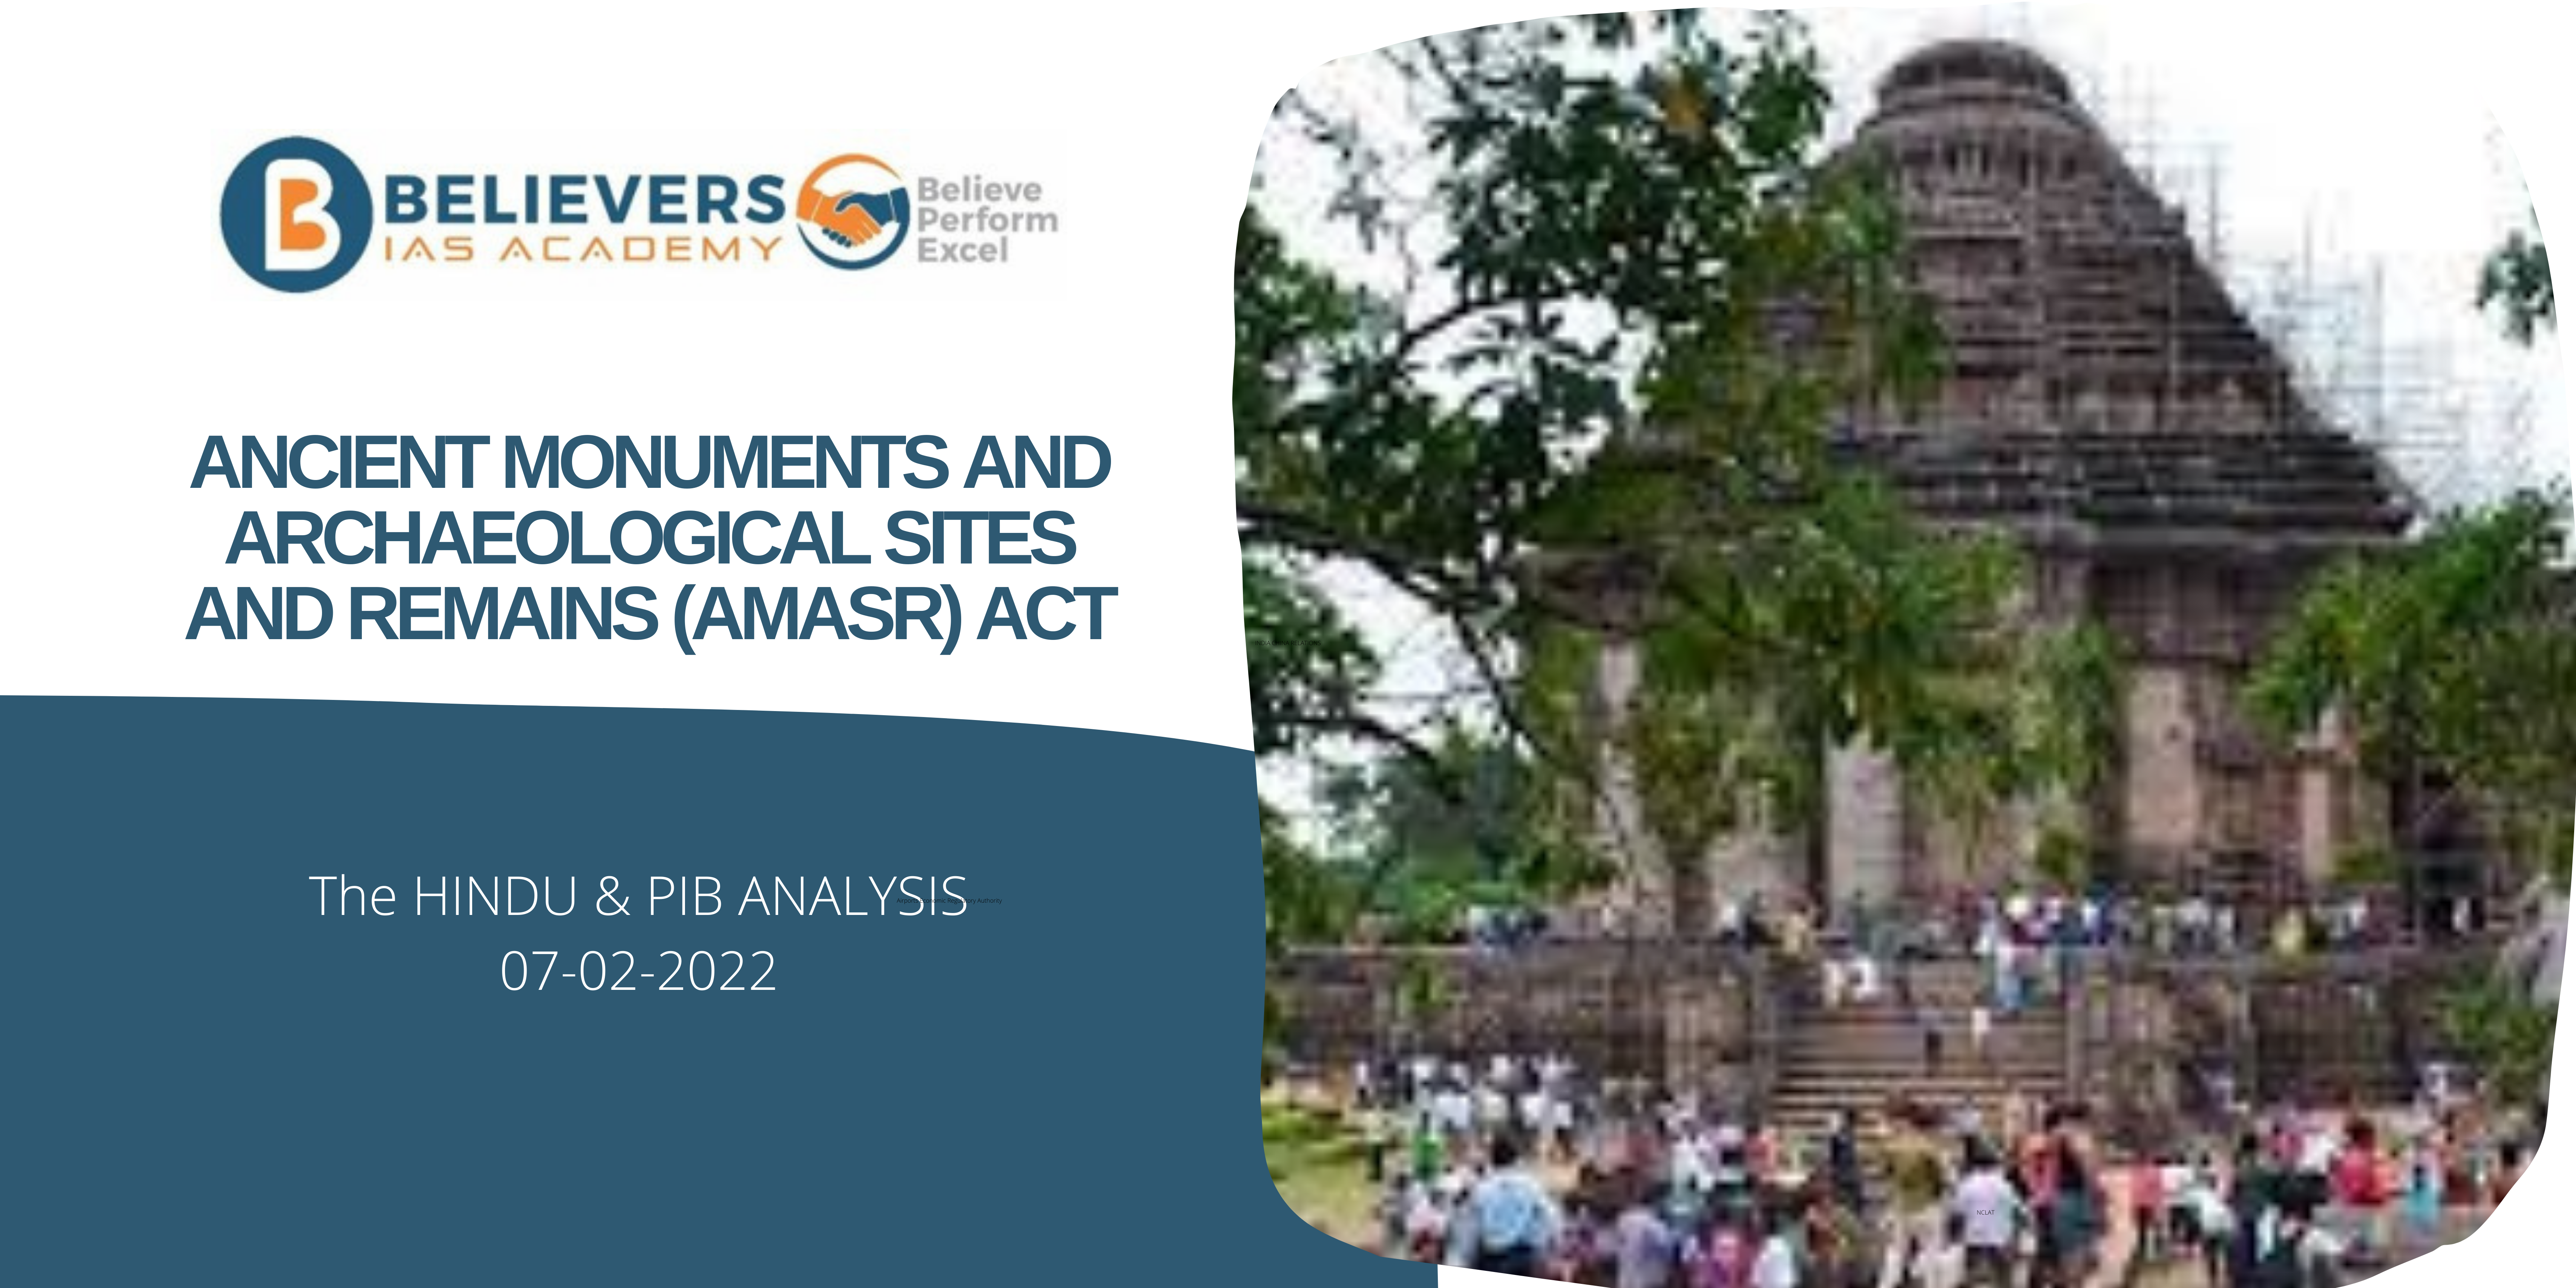 IAS Current affairs - Ancient Monuments and Archaeological Sites and Remains Act